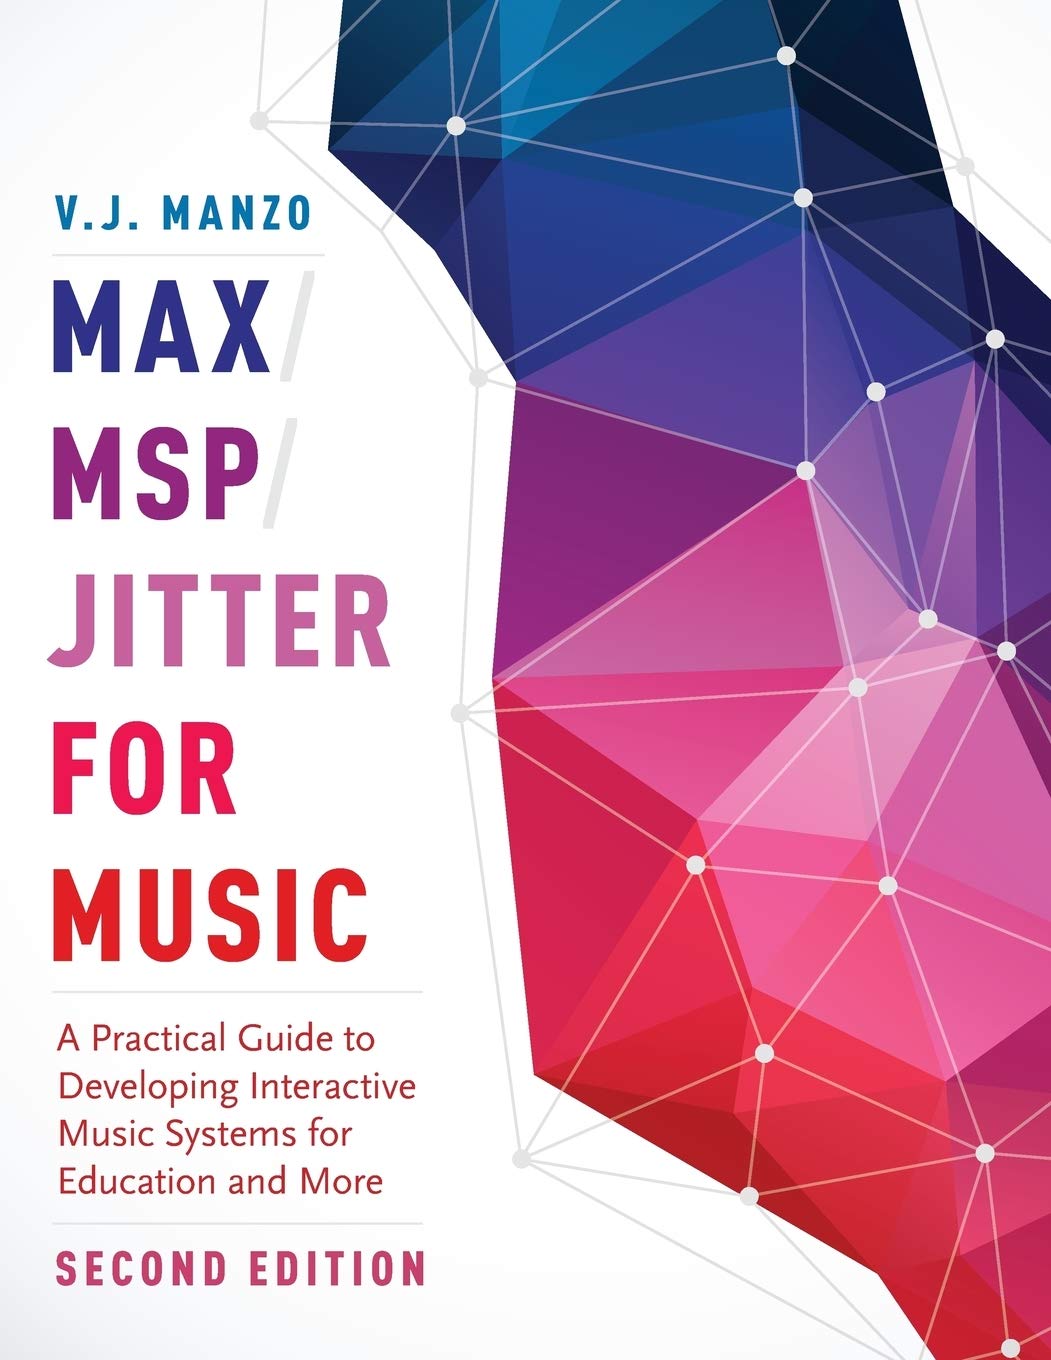 Max/MSP/Jitter for Music by V.J. Manzo